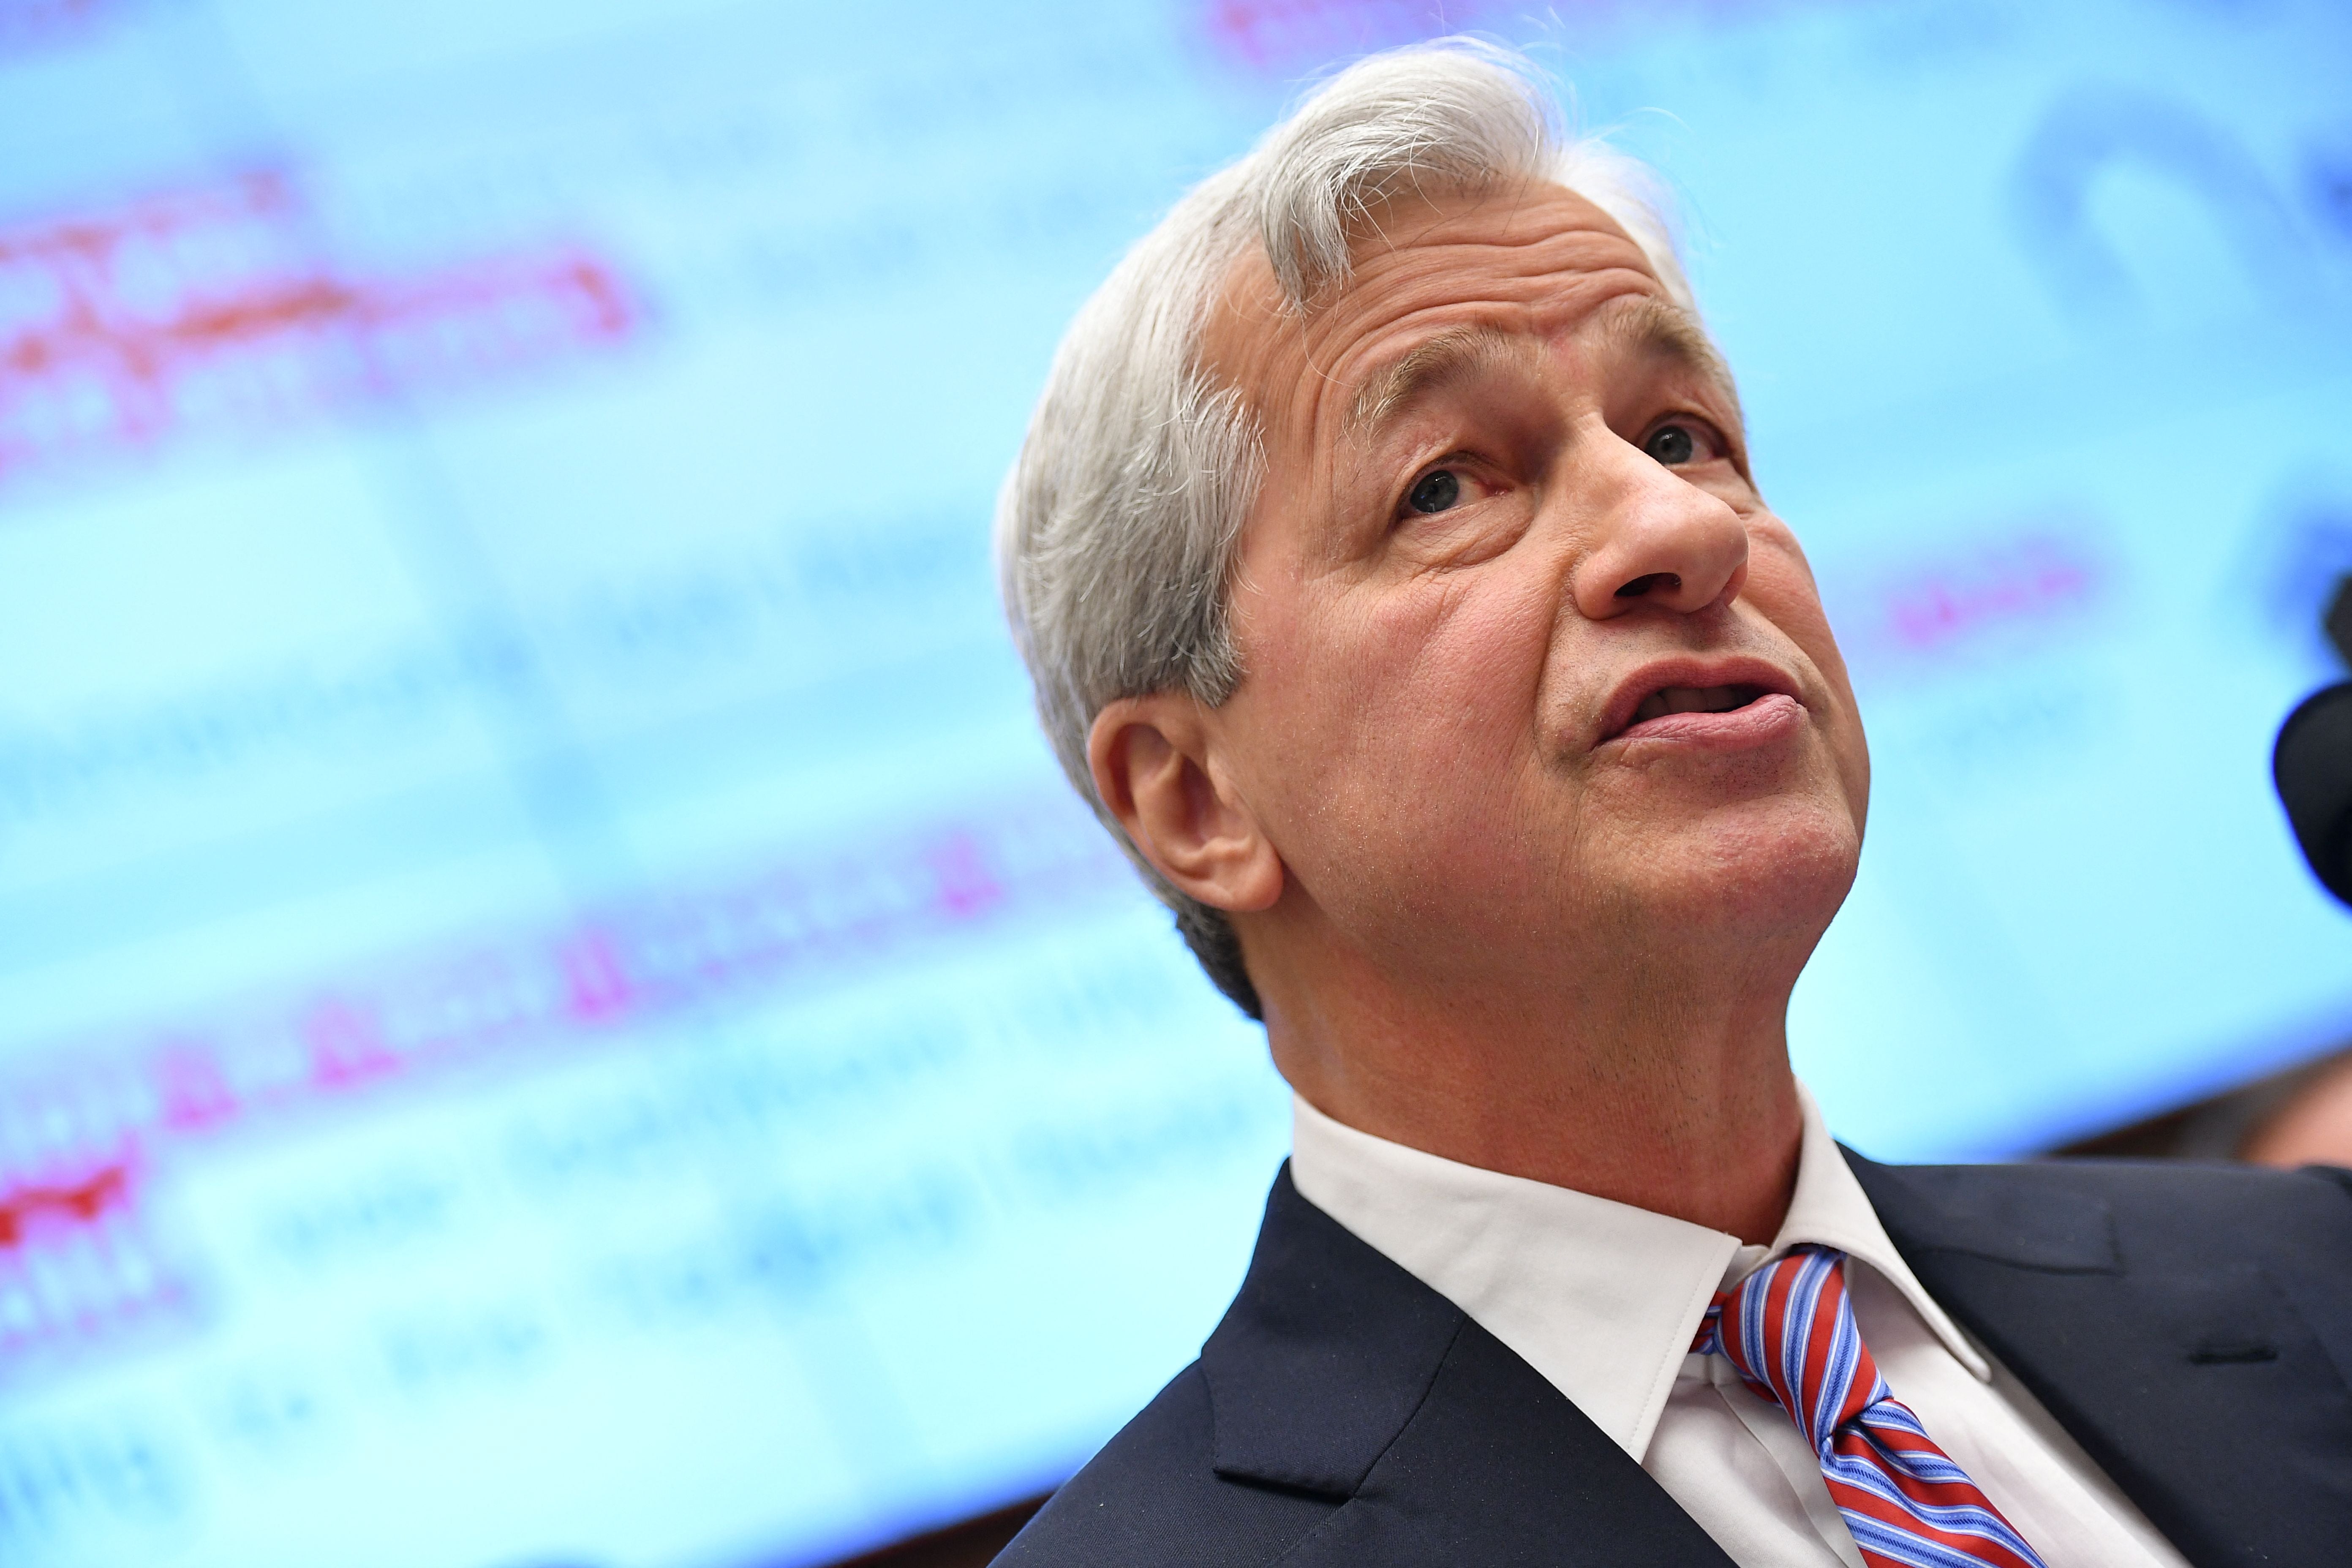 Jamie Dimon said any such move would be “many years out” but warned that London will need to “adapt and reinvent itself” after Brexit